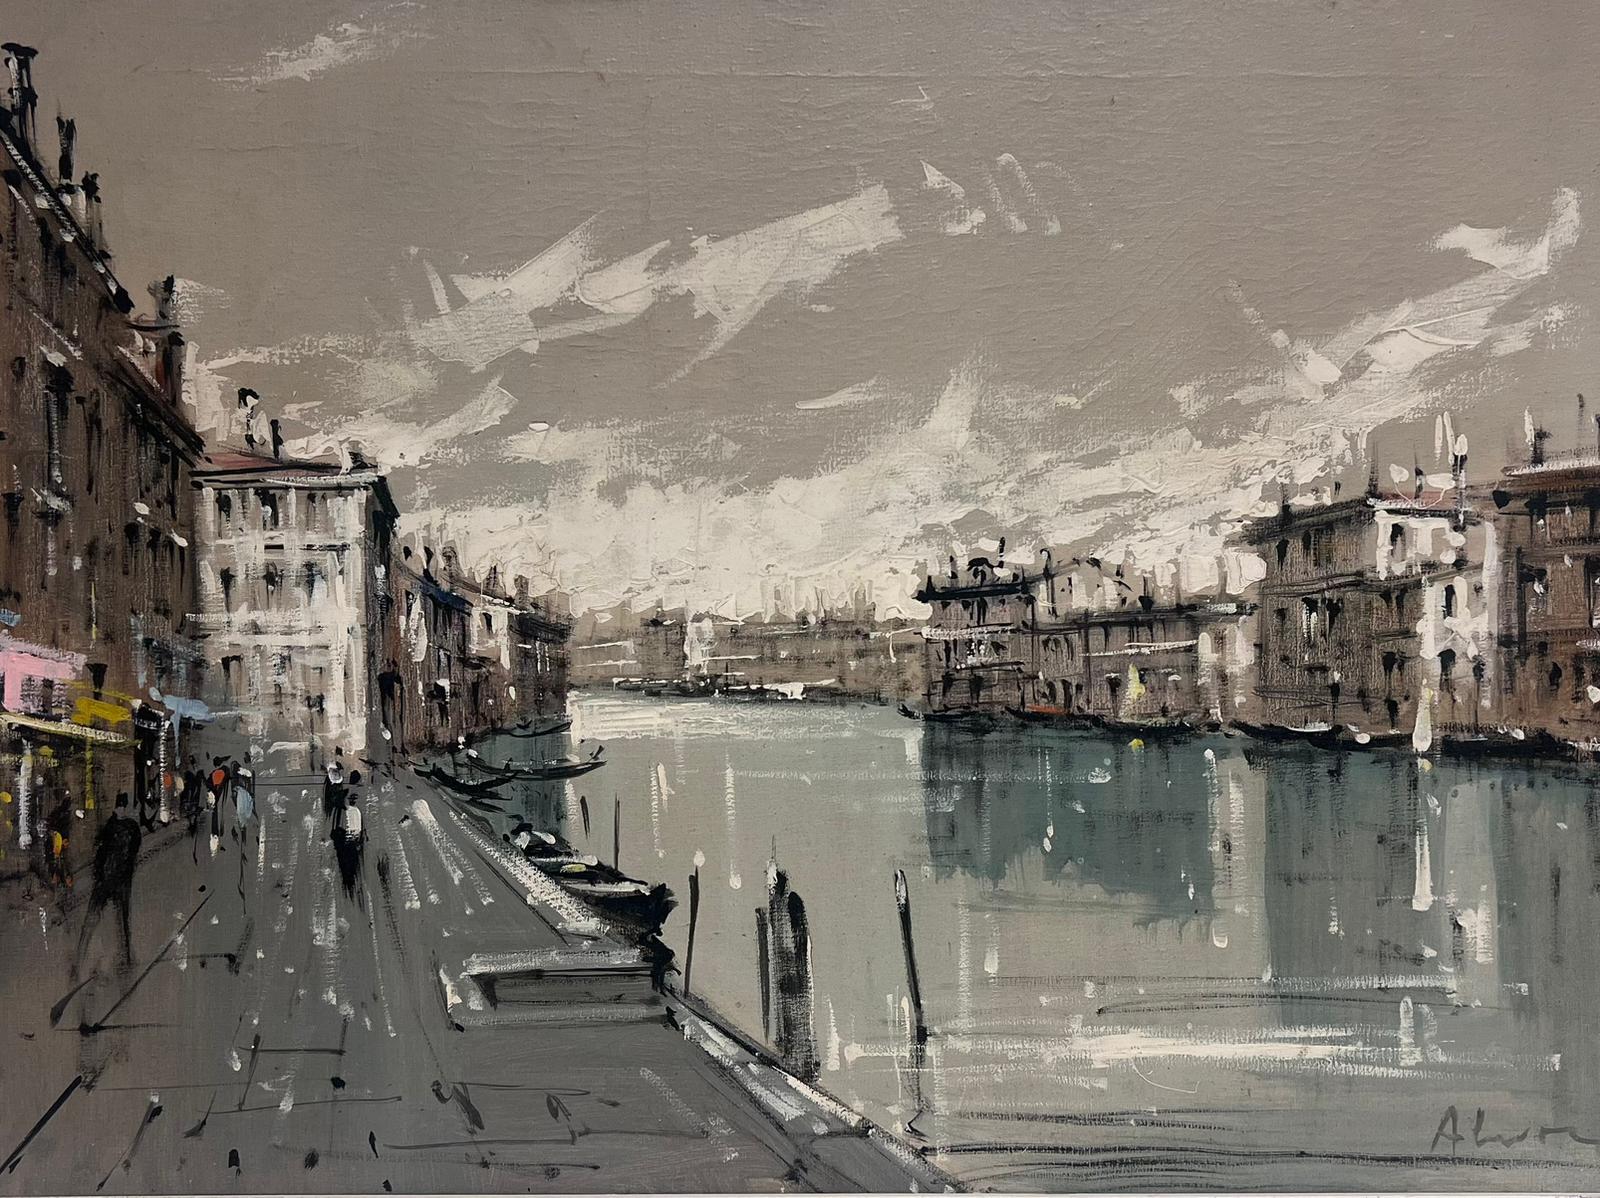 Alvarez Figurative Painting - Large 1960's Modernist Signed Oil Painting Venice Grand Canal Atmospheric Work